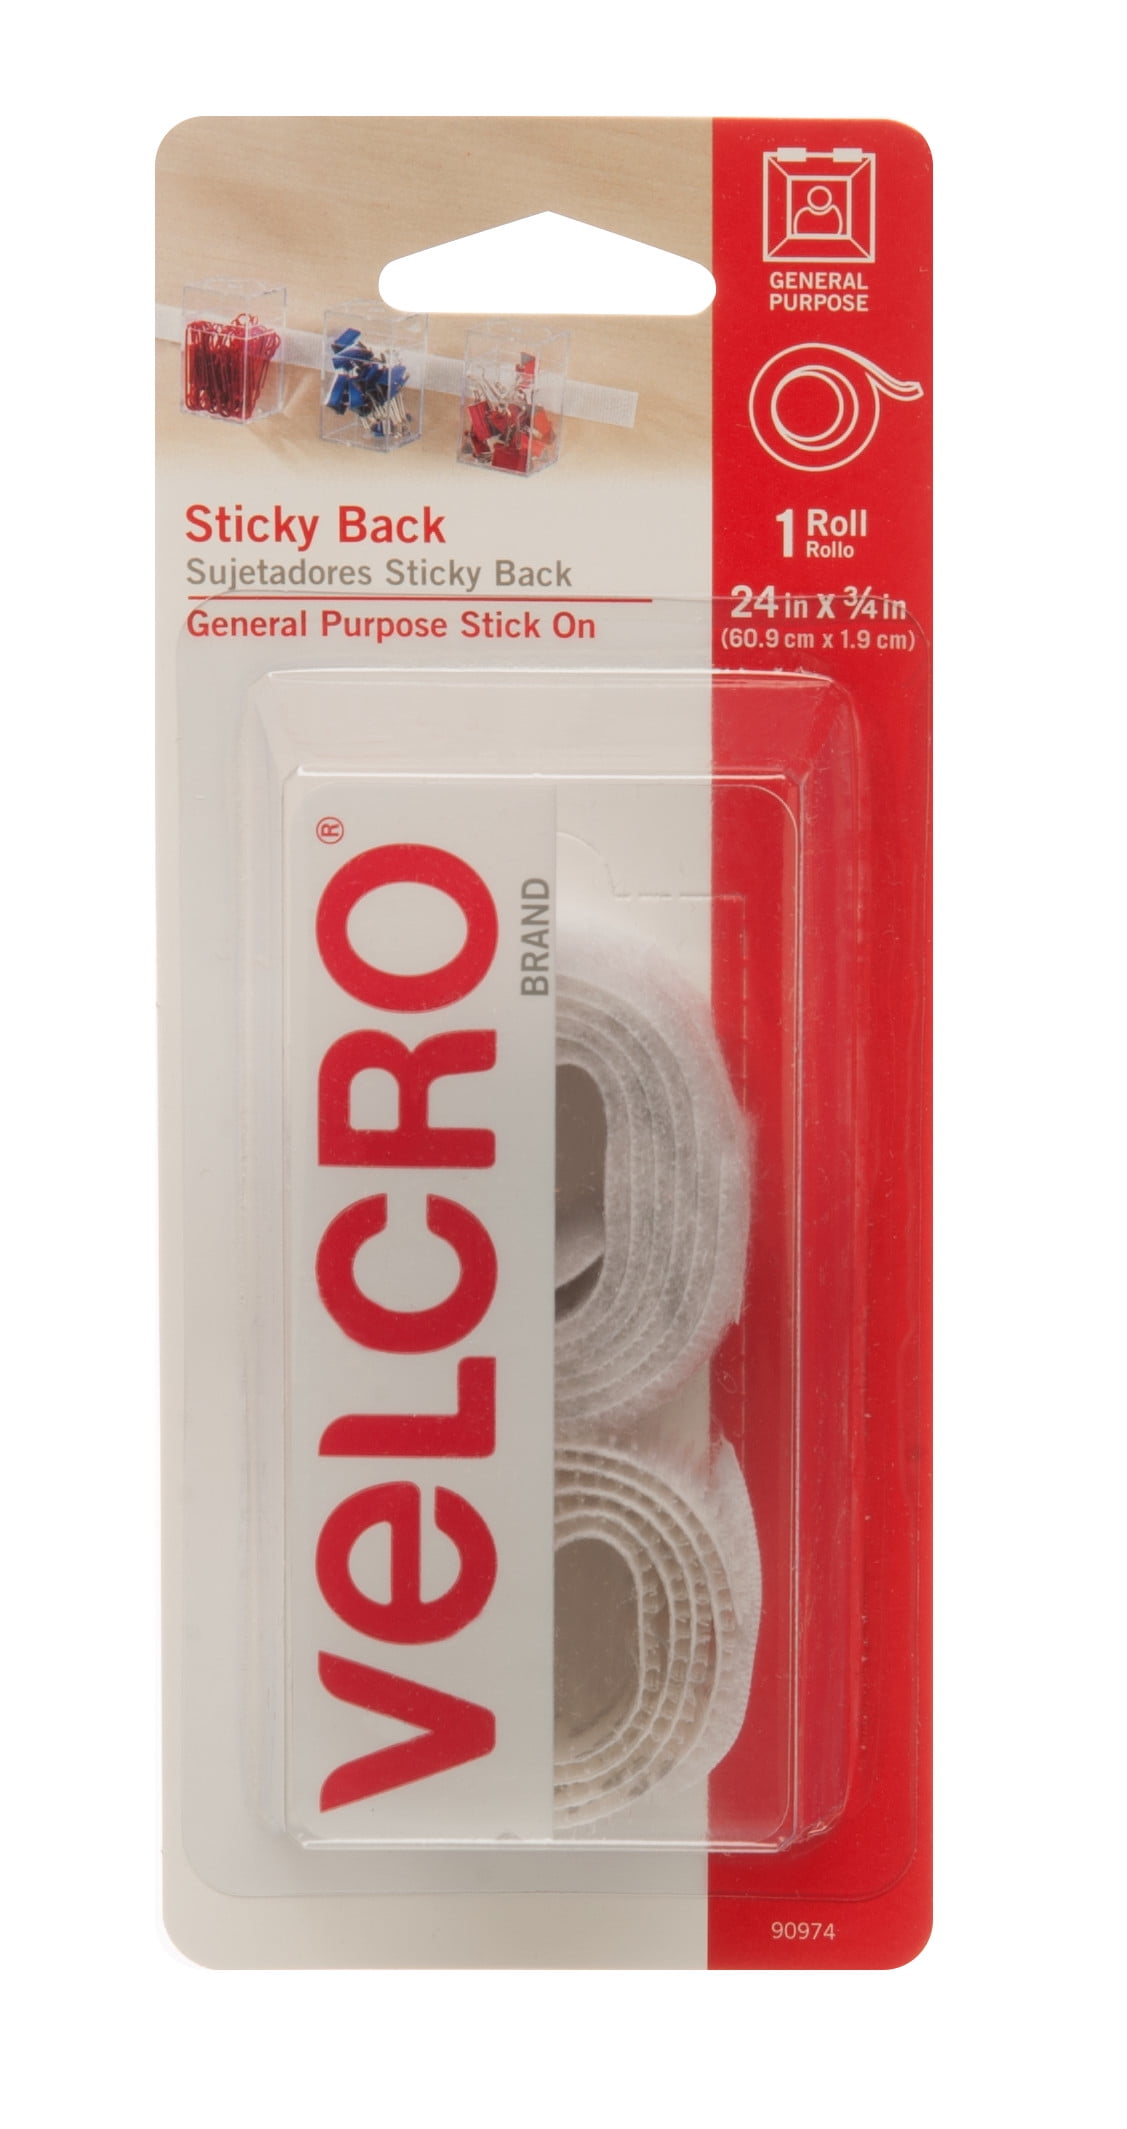 VELCRO Brand - Back Hook Loop Fasteners – Peel and Stick Permanent Adhesive Tape Keeps Classrooms, Home, and Offices Organized – Cut-to-Length | 24in x 3/4in Roll White - Walmart.com